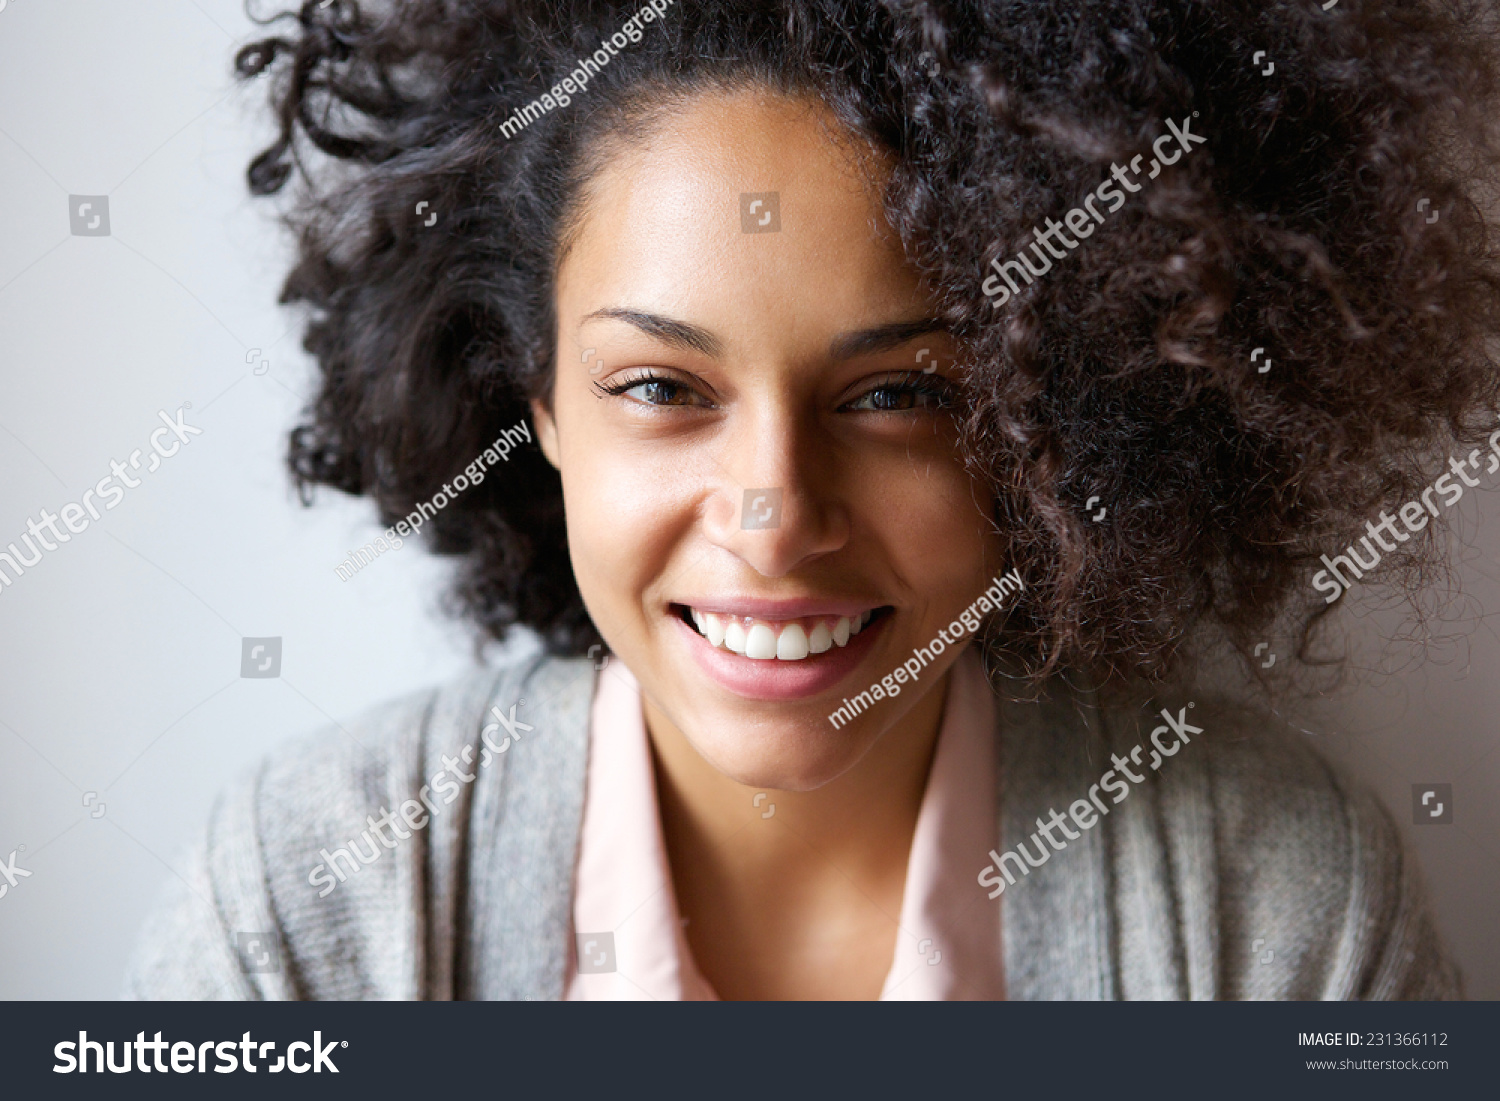 Close up portrait of a beautiful young african american woman smiling #231366112